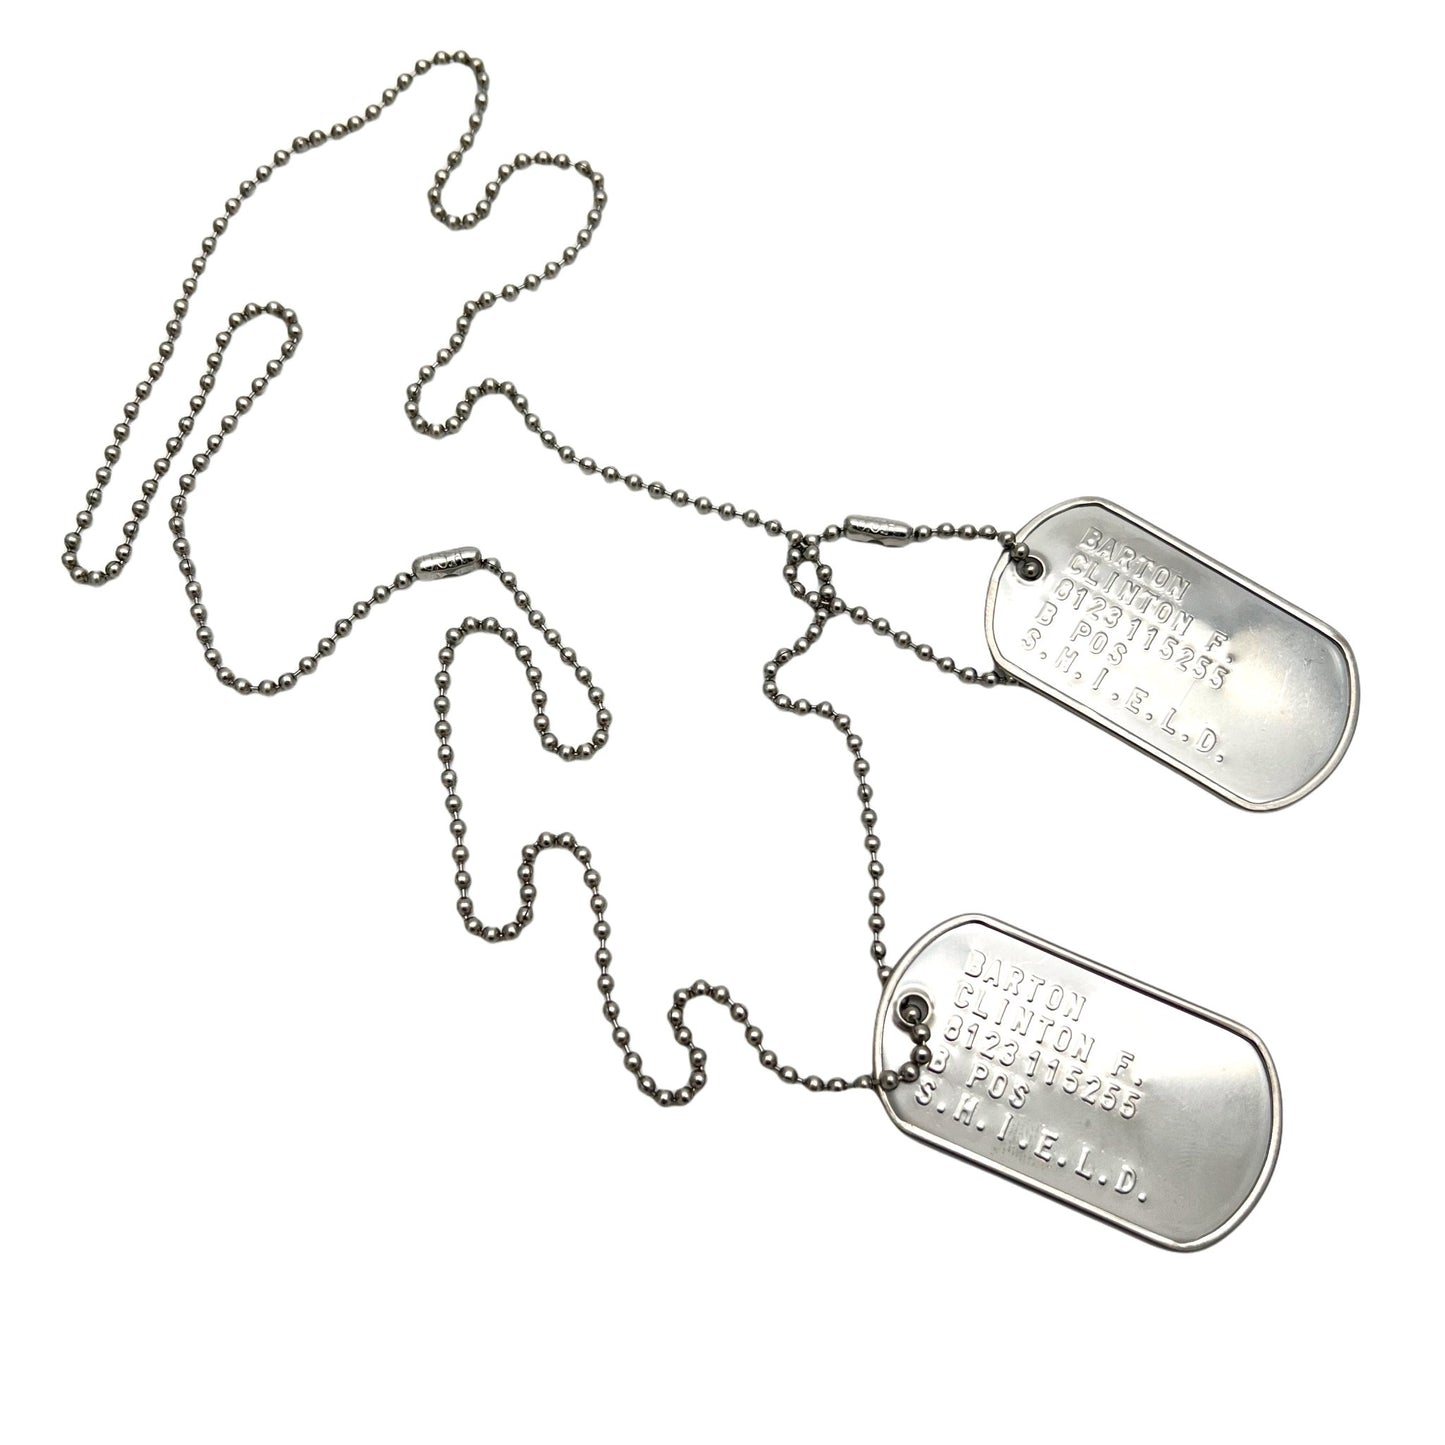 Barton Clinton 'HAWKEYE' Military Dog Tags - Costume Cosplay Prop Replica - Stainless Steel Chains Included - TheDogTagCo